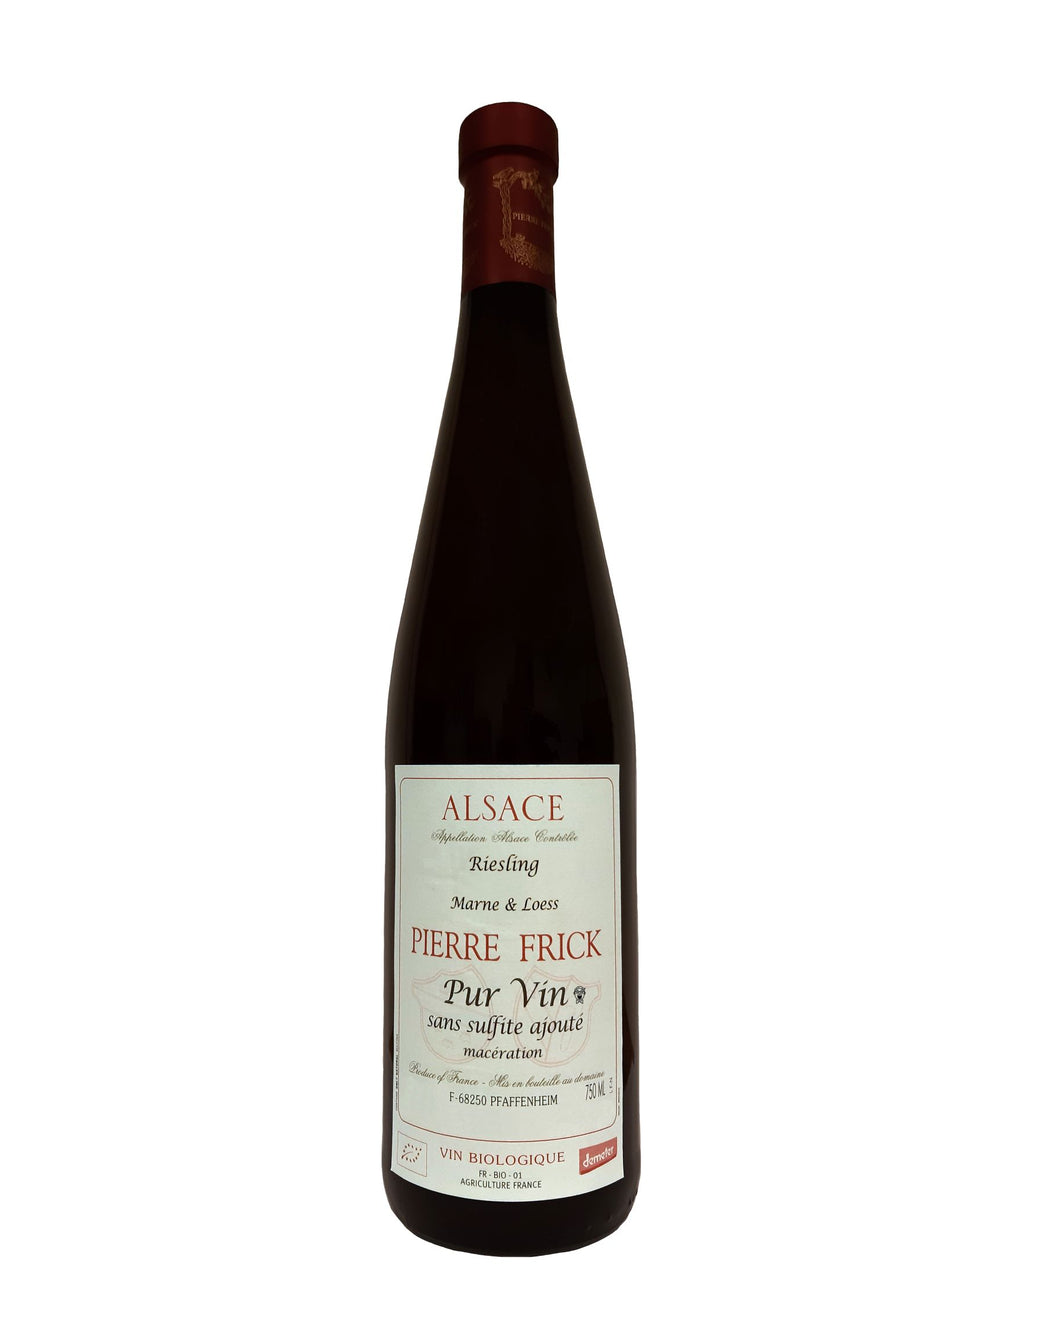 Pierre Frick - Riesling Marne & Loess 2020